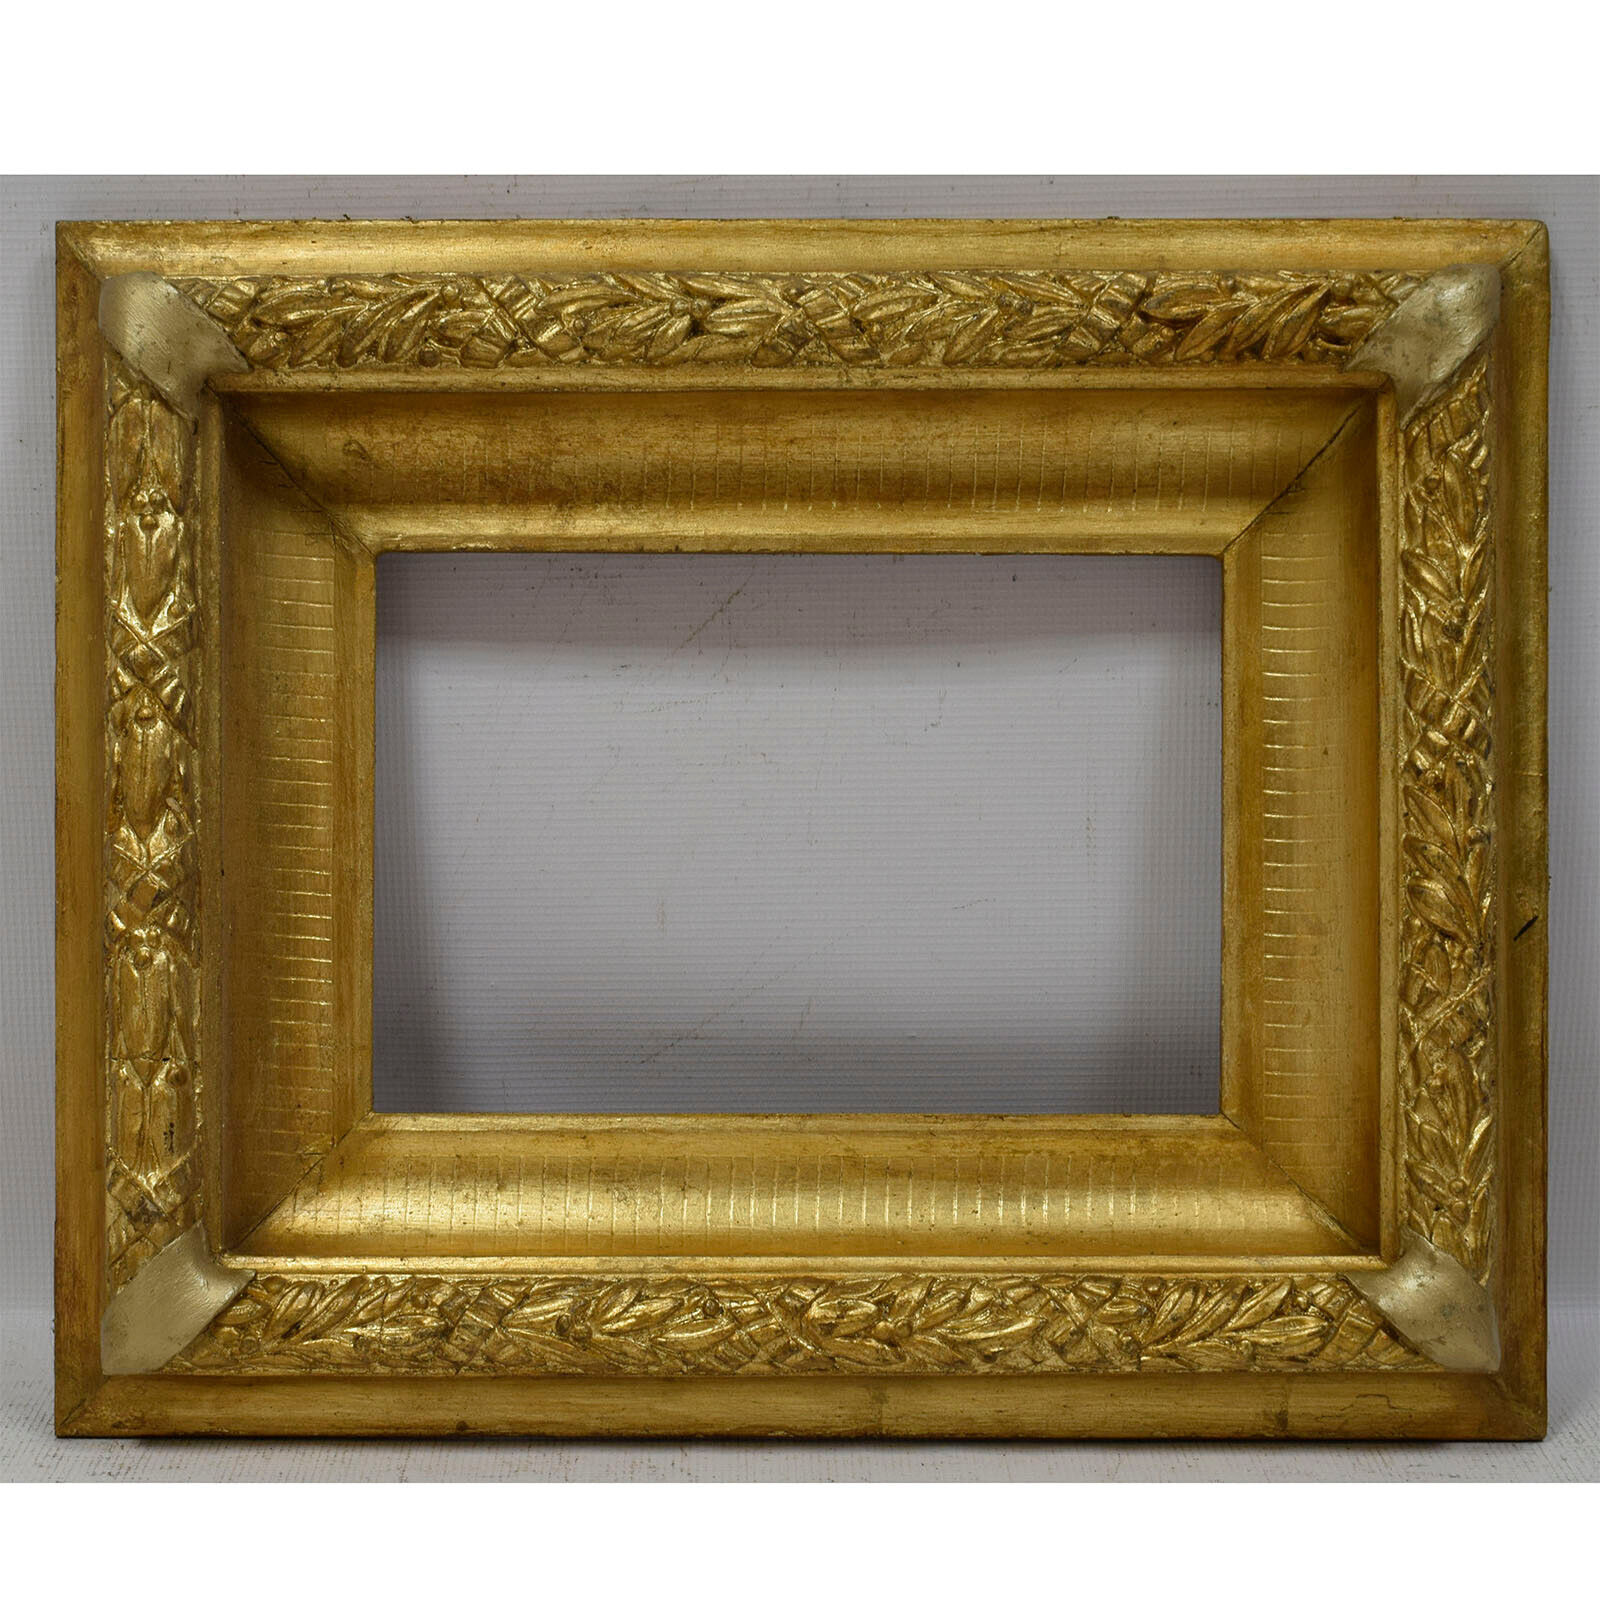 Ca.1850-1900 Old wooden frame with metal leaf Internal: 12.5x8.2 in